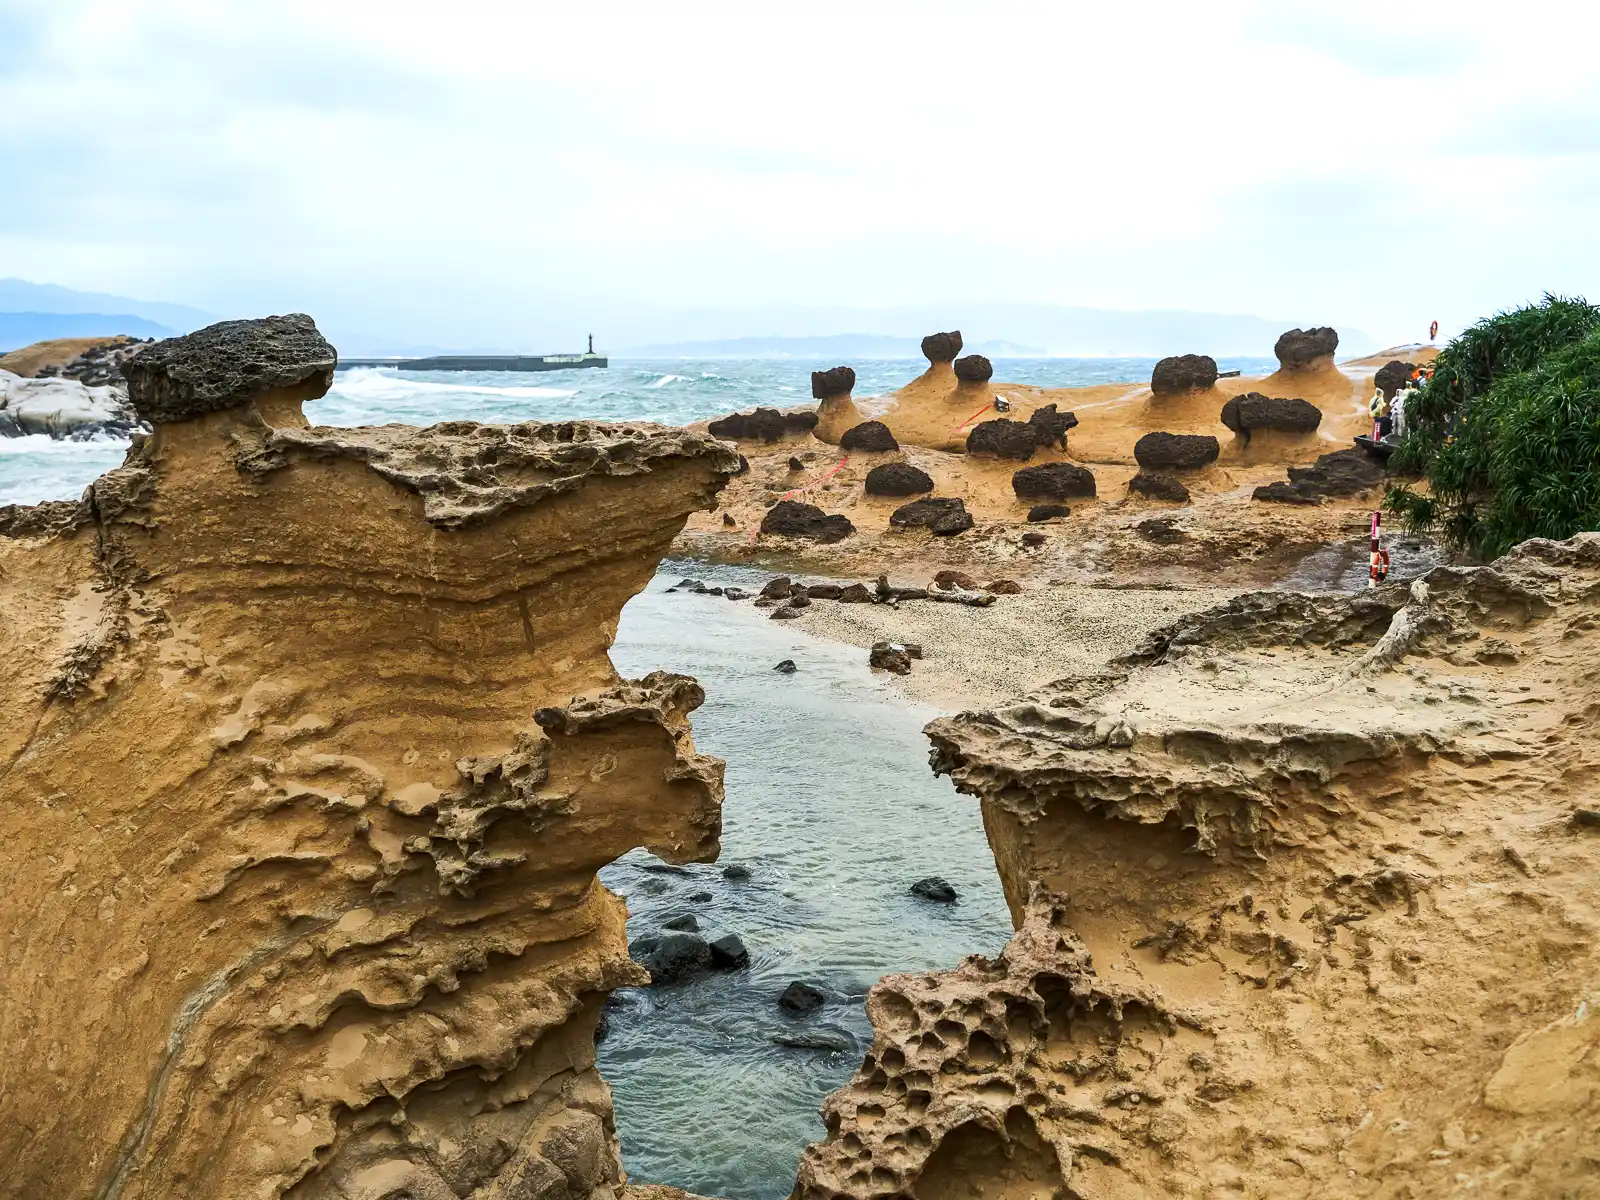 A view of a small cove in Yehliu Geopark.